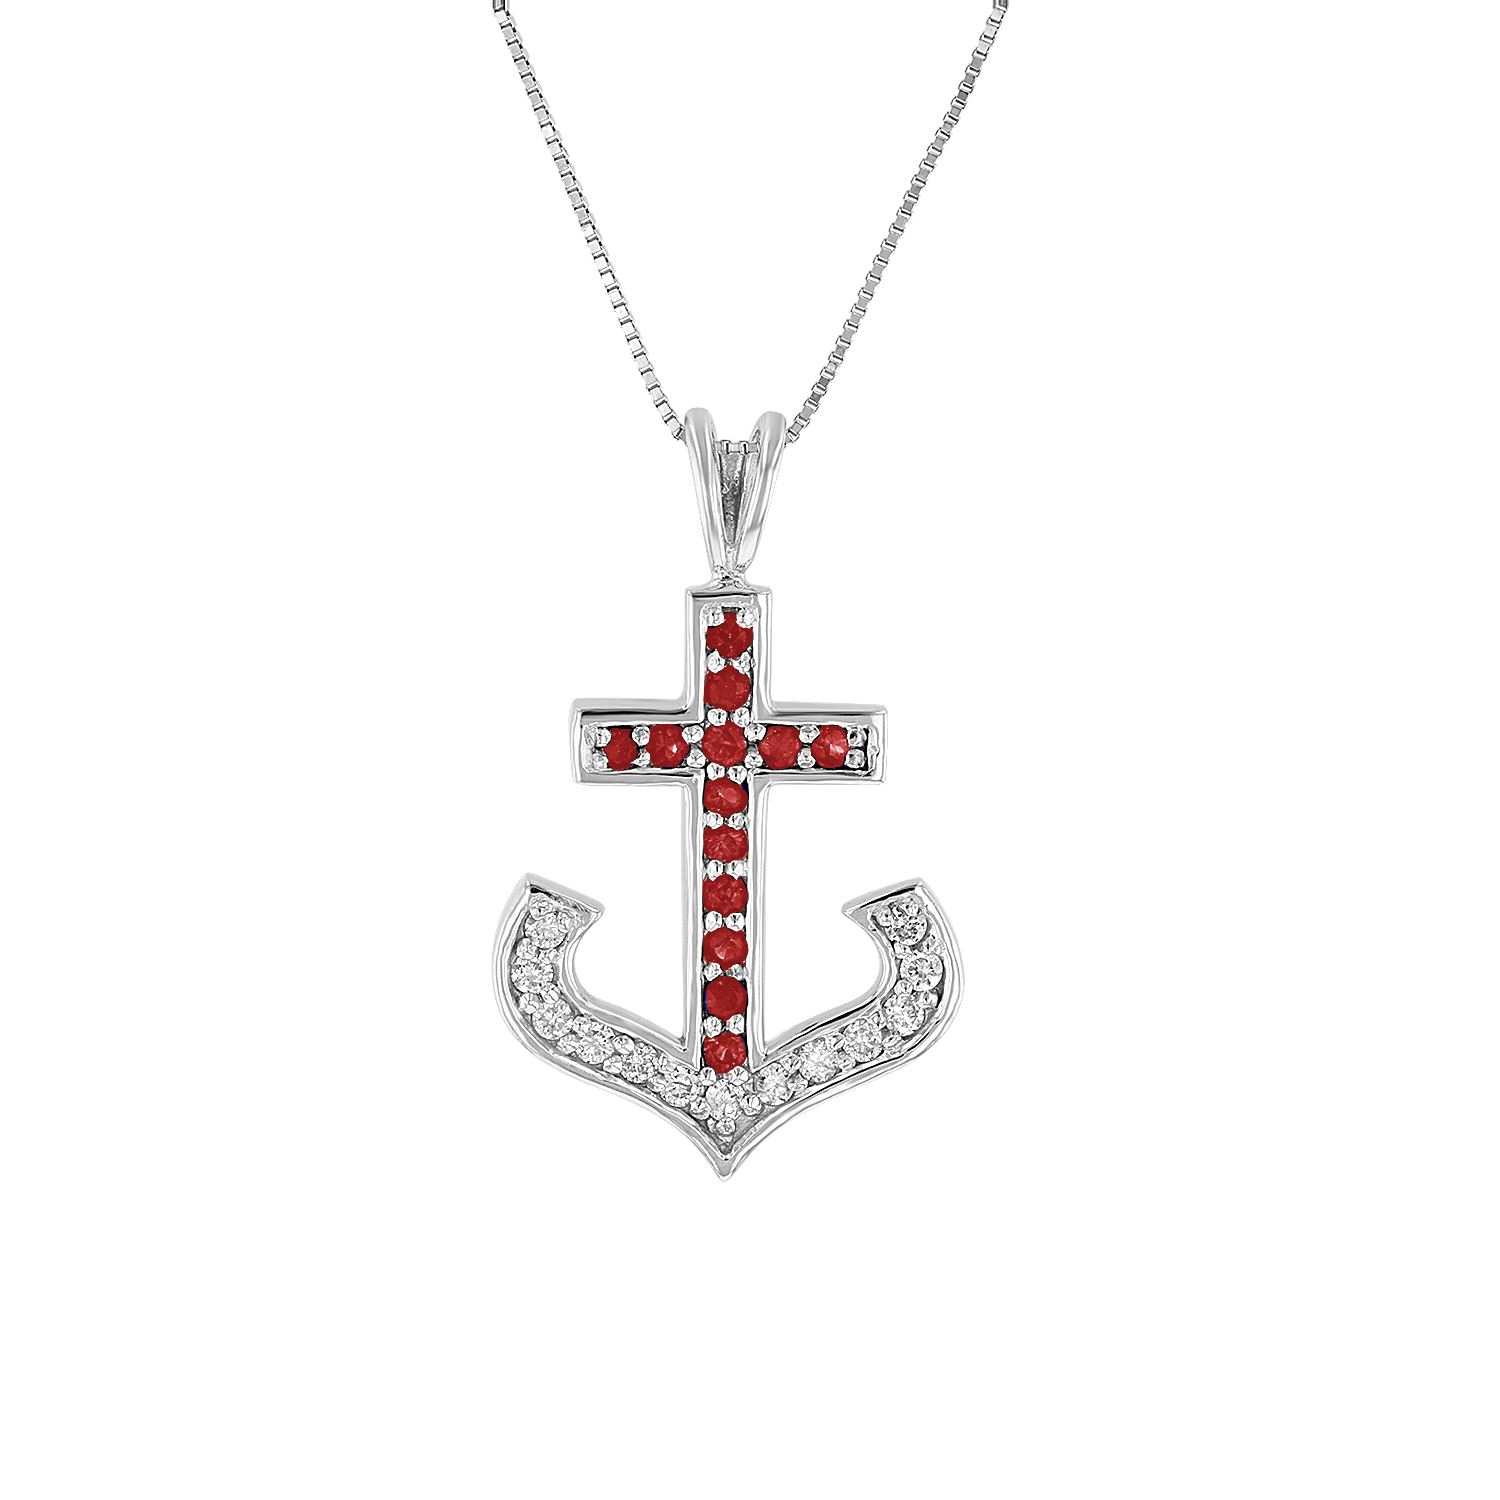 View 0.50ctw DIamond and Ruby Anchor Cross Pendant in 14k White Gold